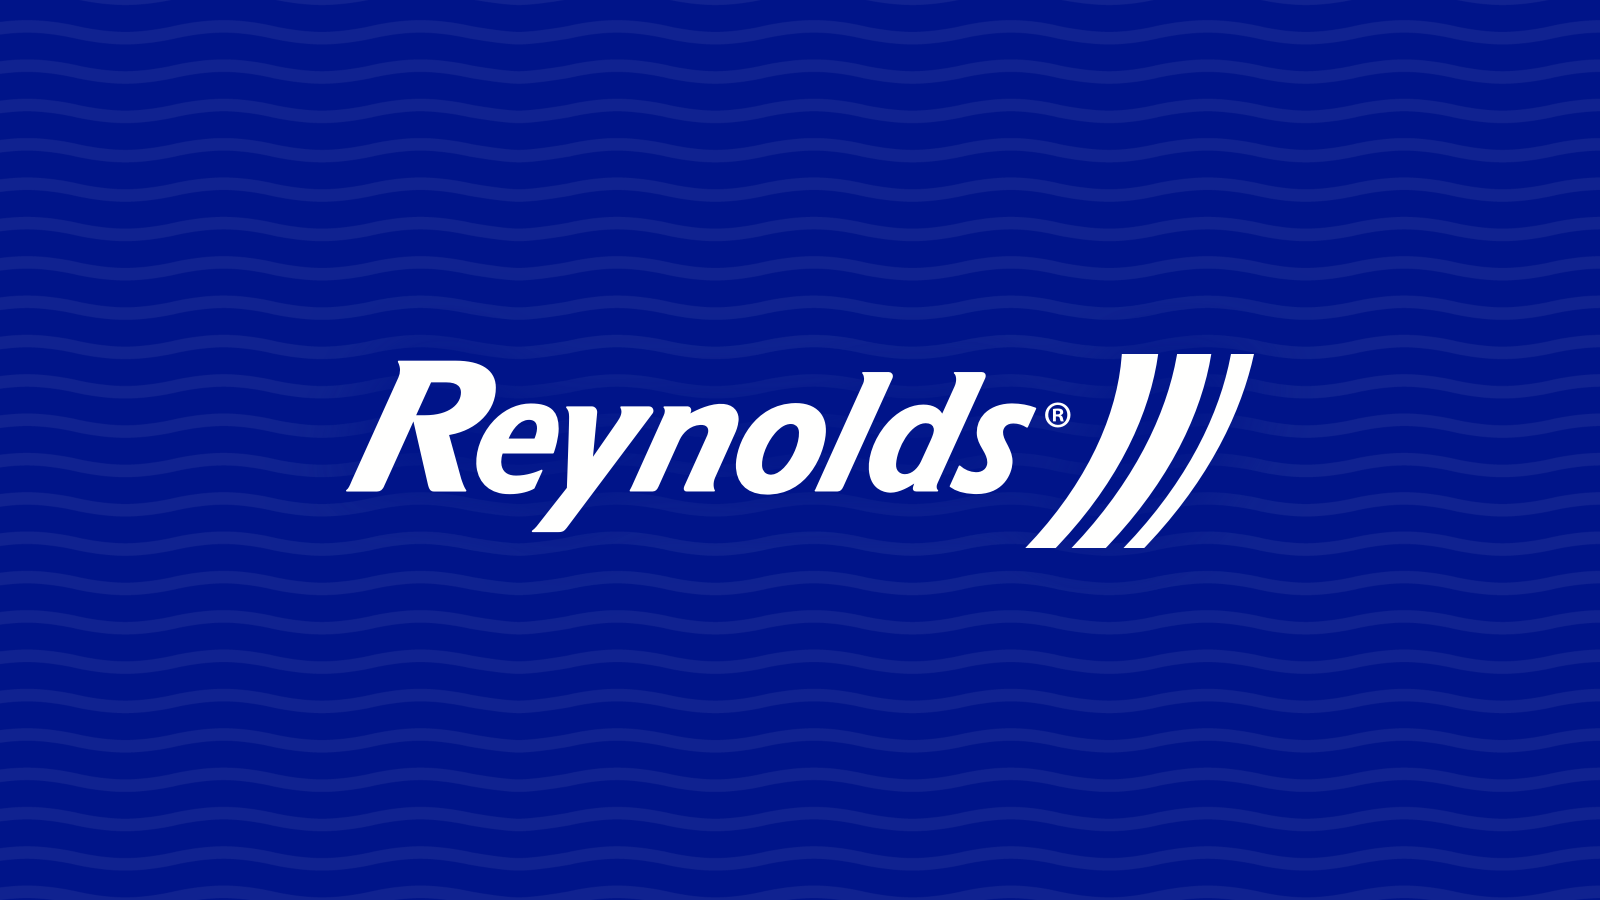 Reynolds Oven Bags Cooking Chart